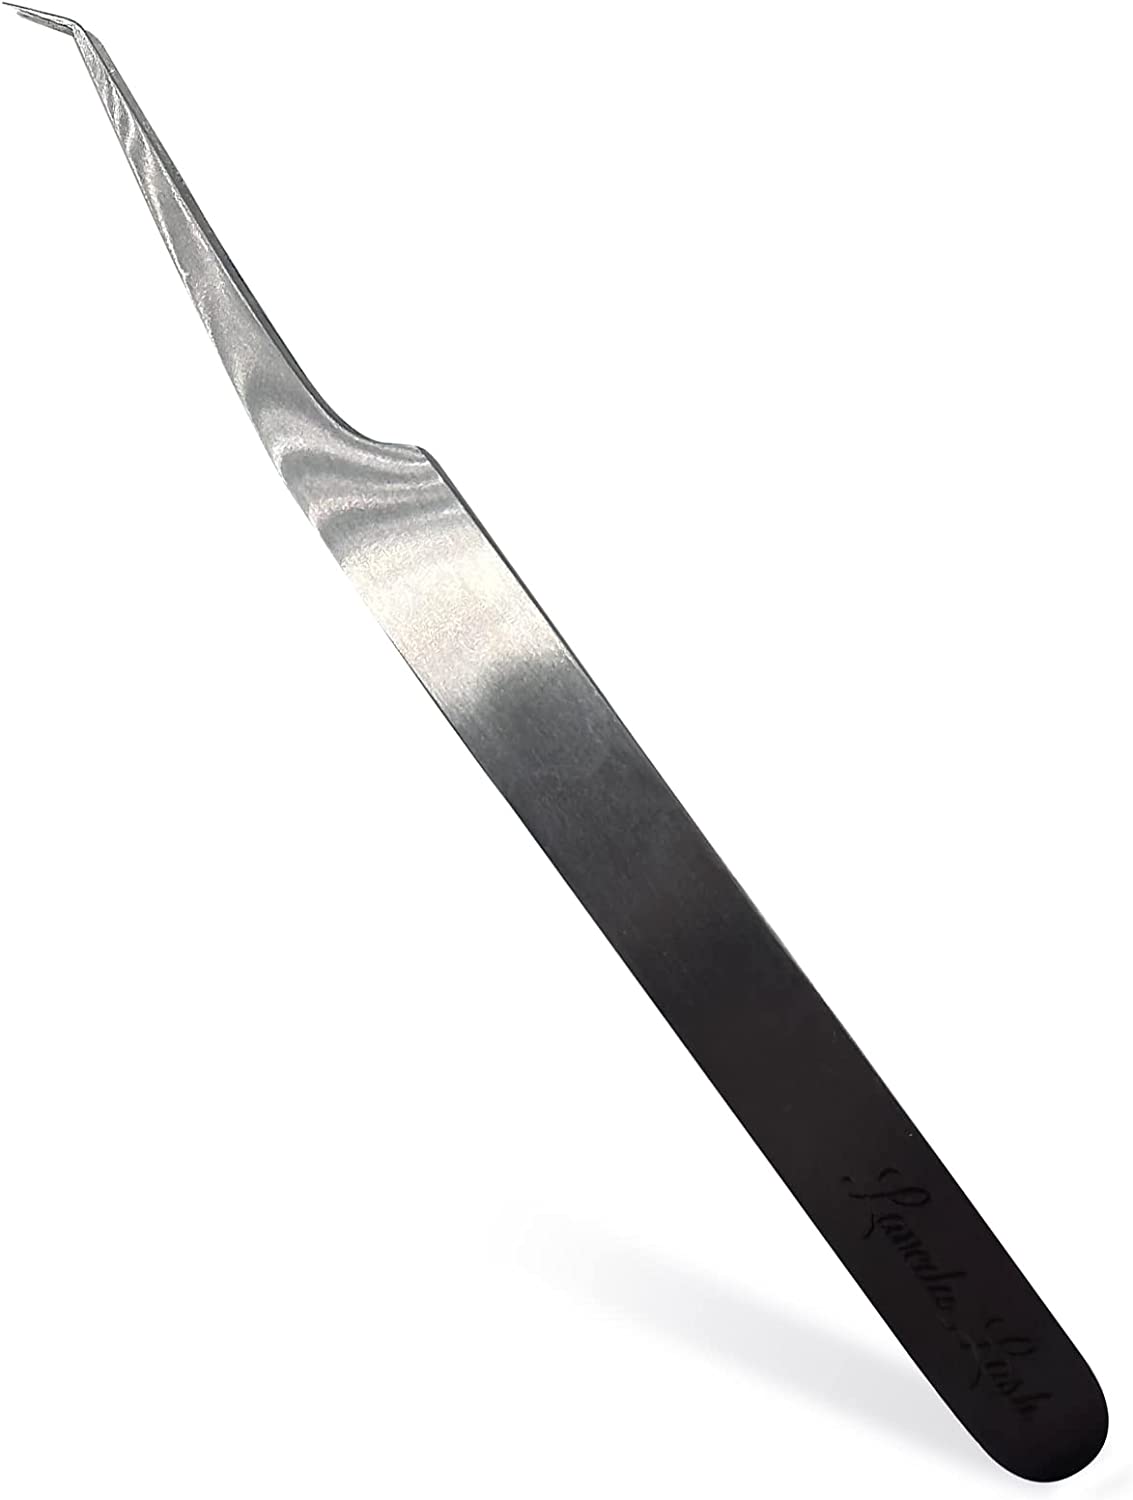 High Precision Stainless Steel Curved Tweezers by Laveda Lash & Brow